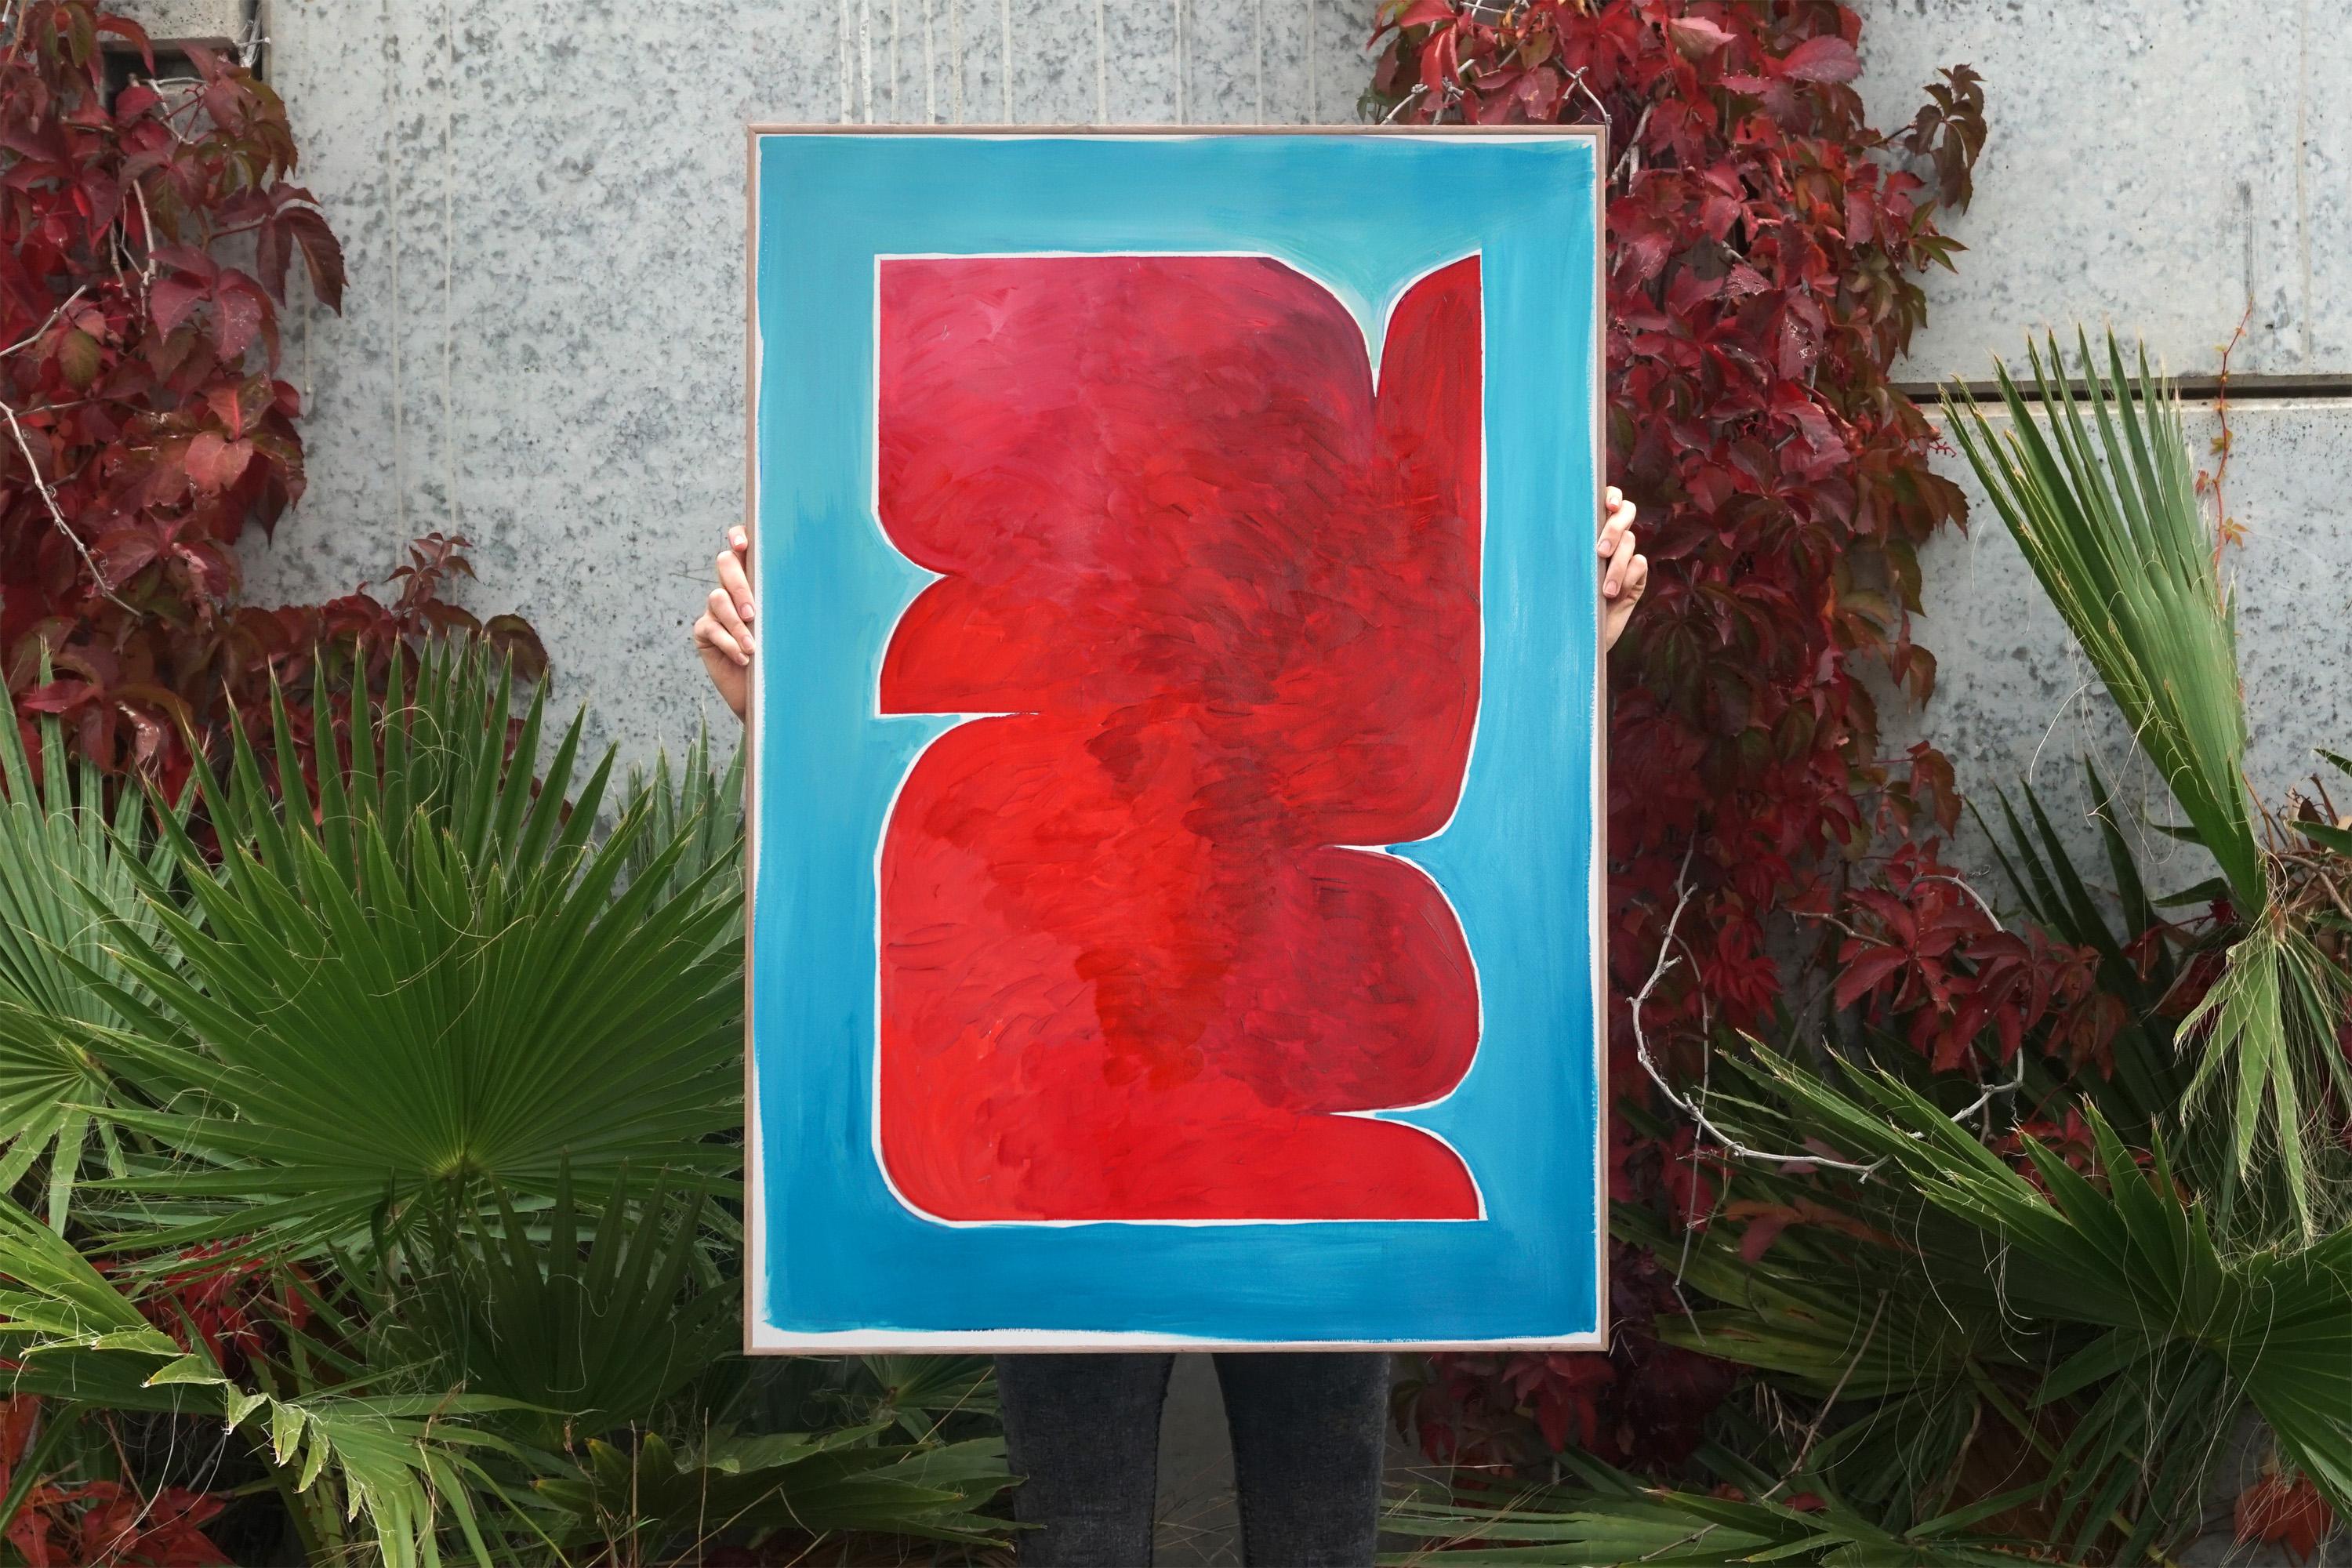 Red Sculptural Contours on Blue, Abstract Tribal Silhouette, Organic Monolith  - Cubist Painting by Natalia Roman